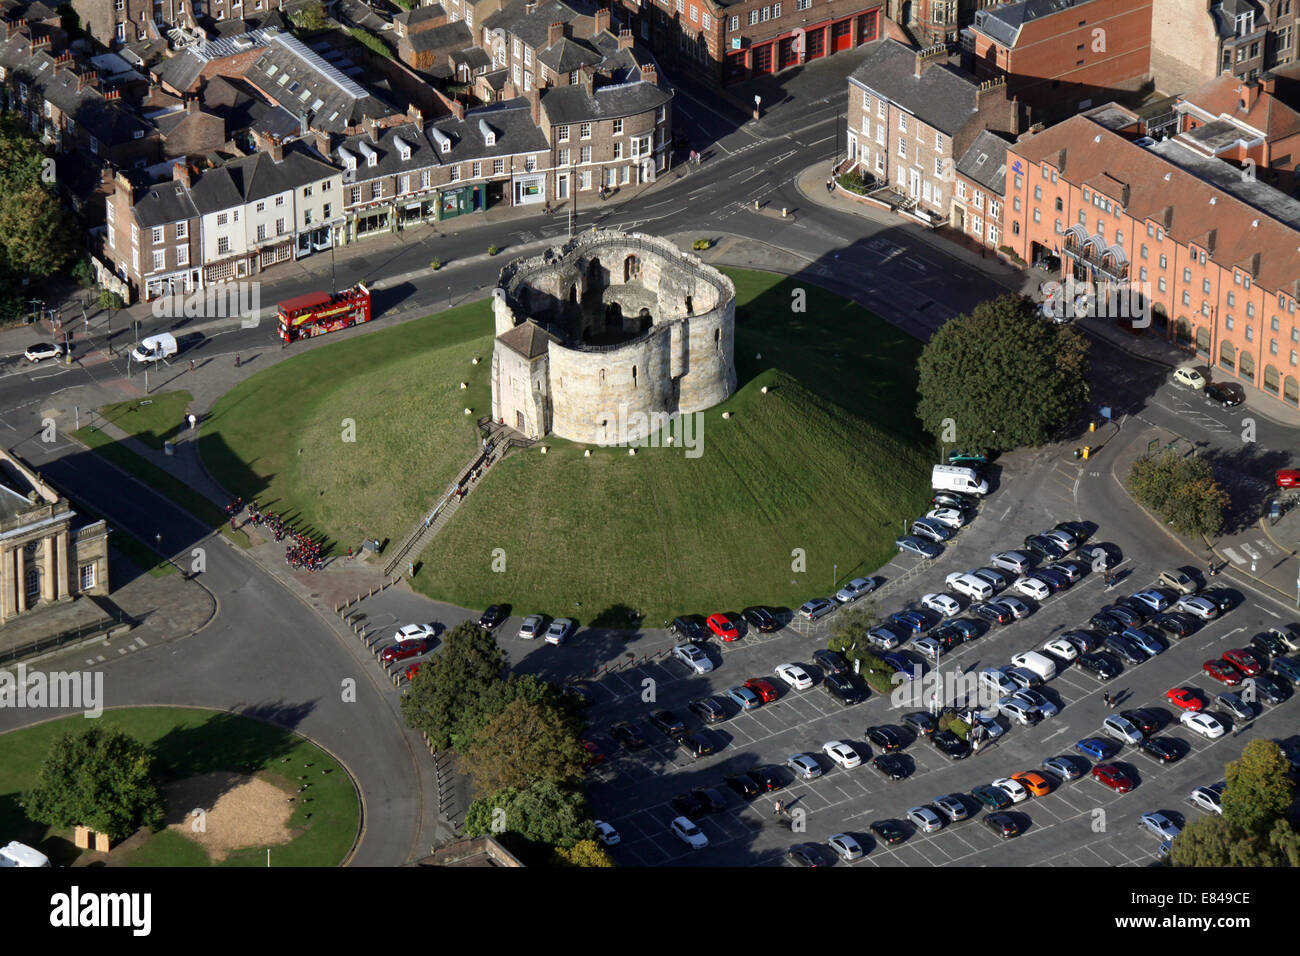 aerial view of Clifford's Tower castle, York, England, UK Stock Photo